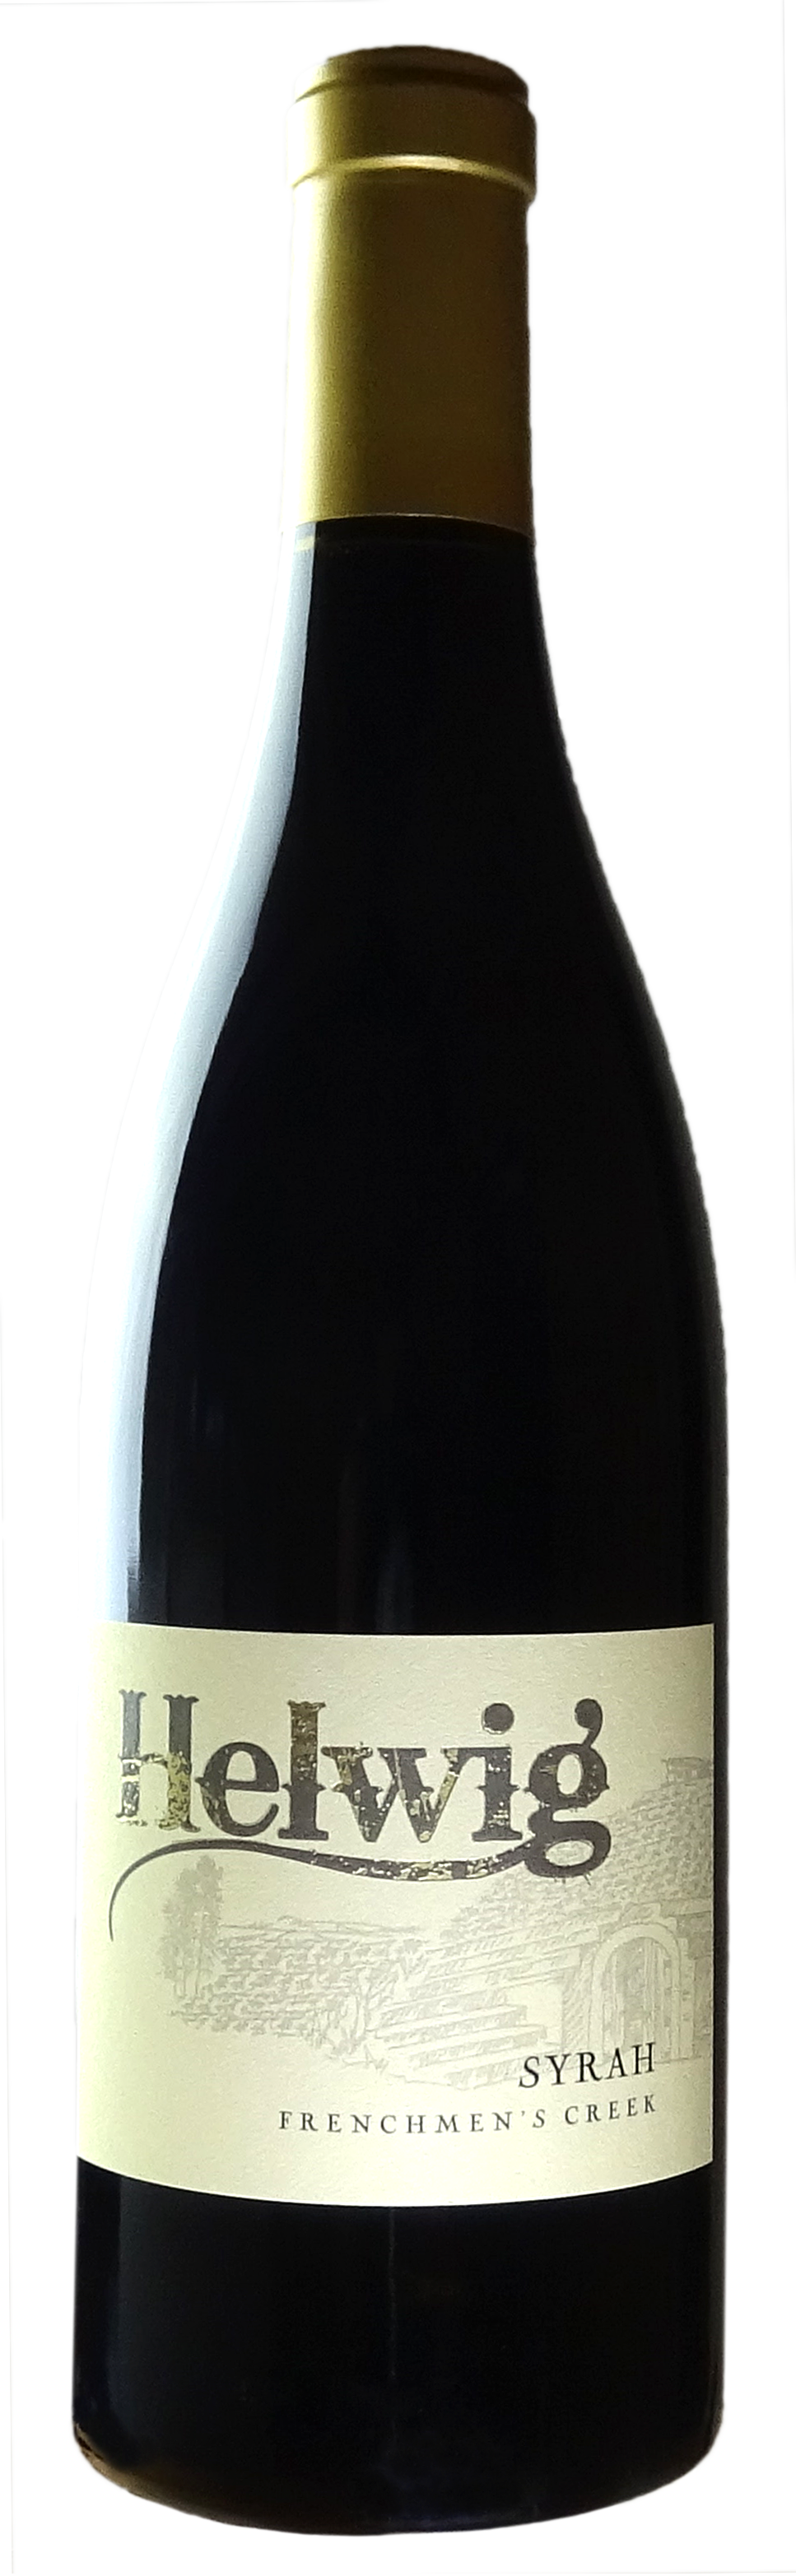 Product Image for Syrah - Frenchmen's Creek '17